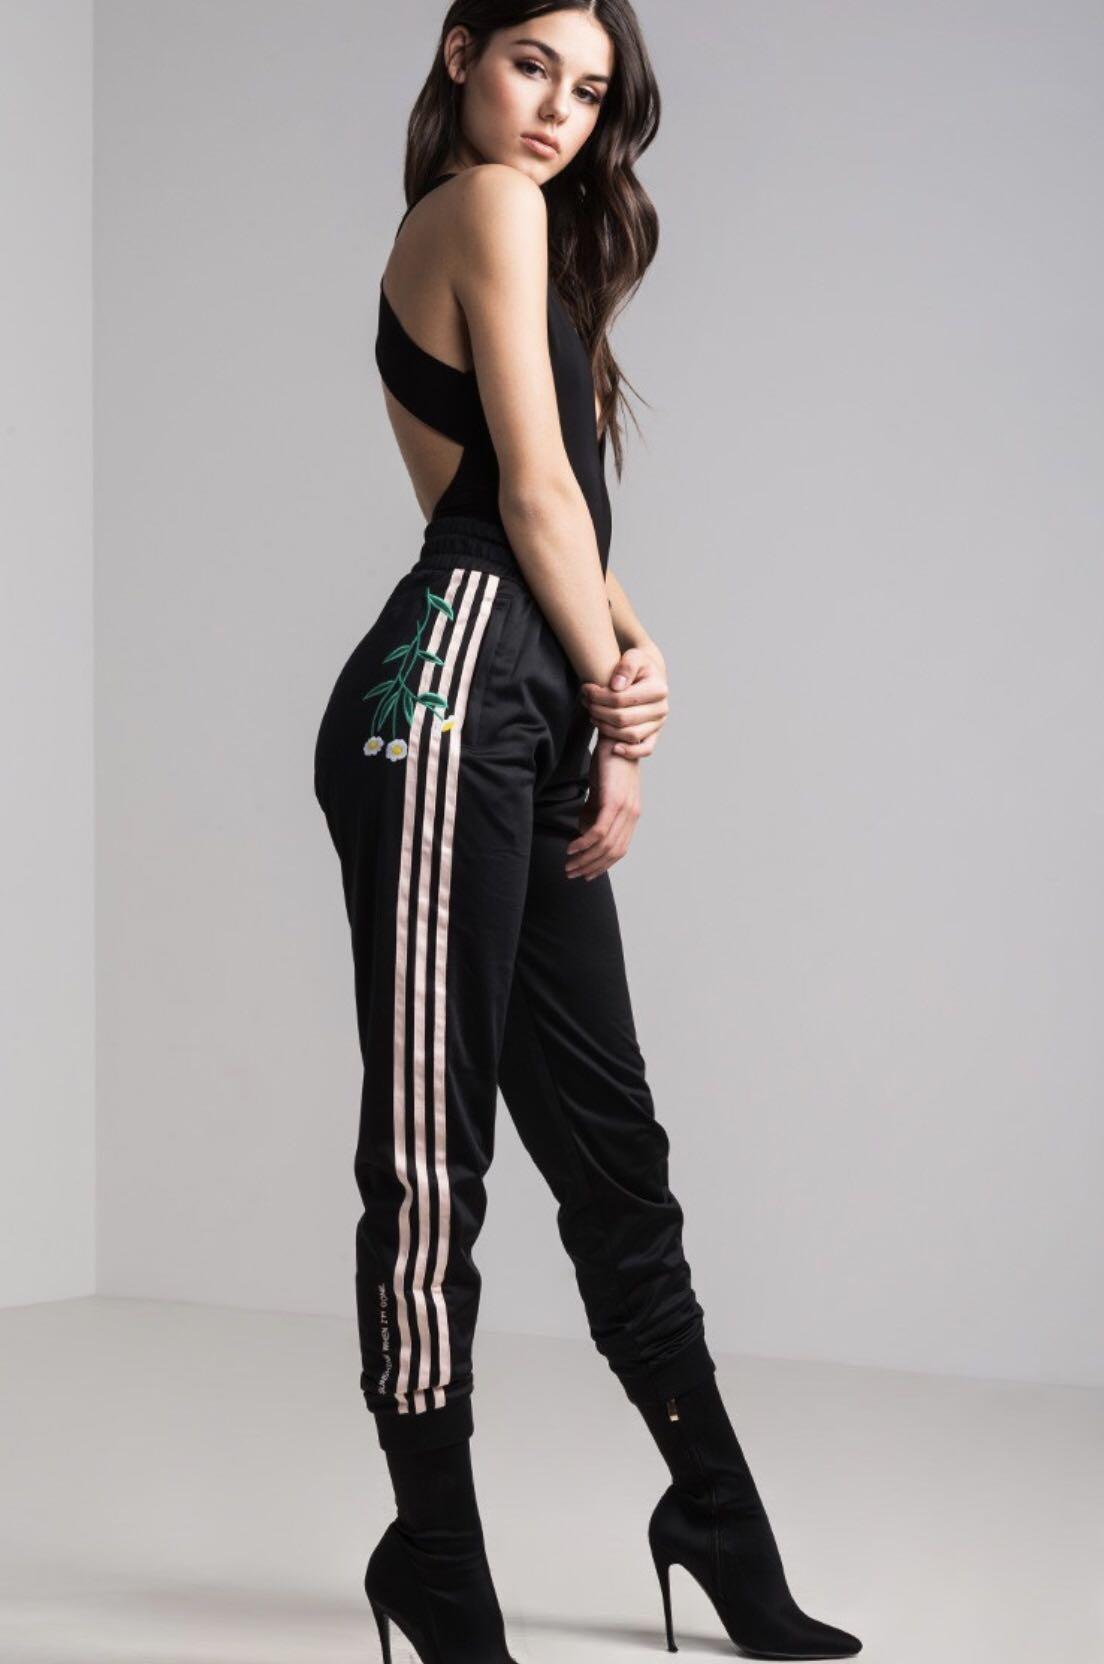 adidas pants with pink stripes